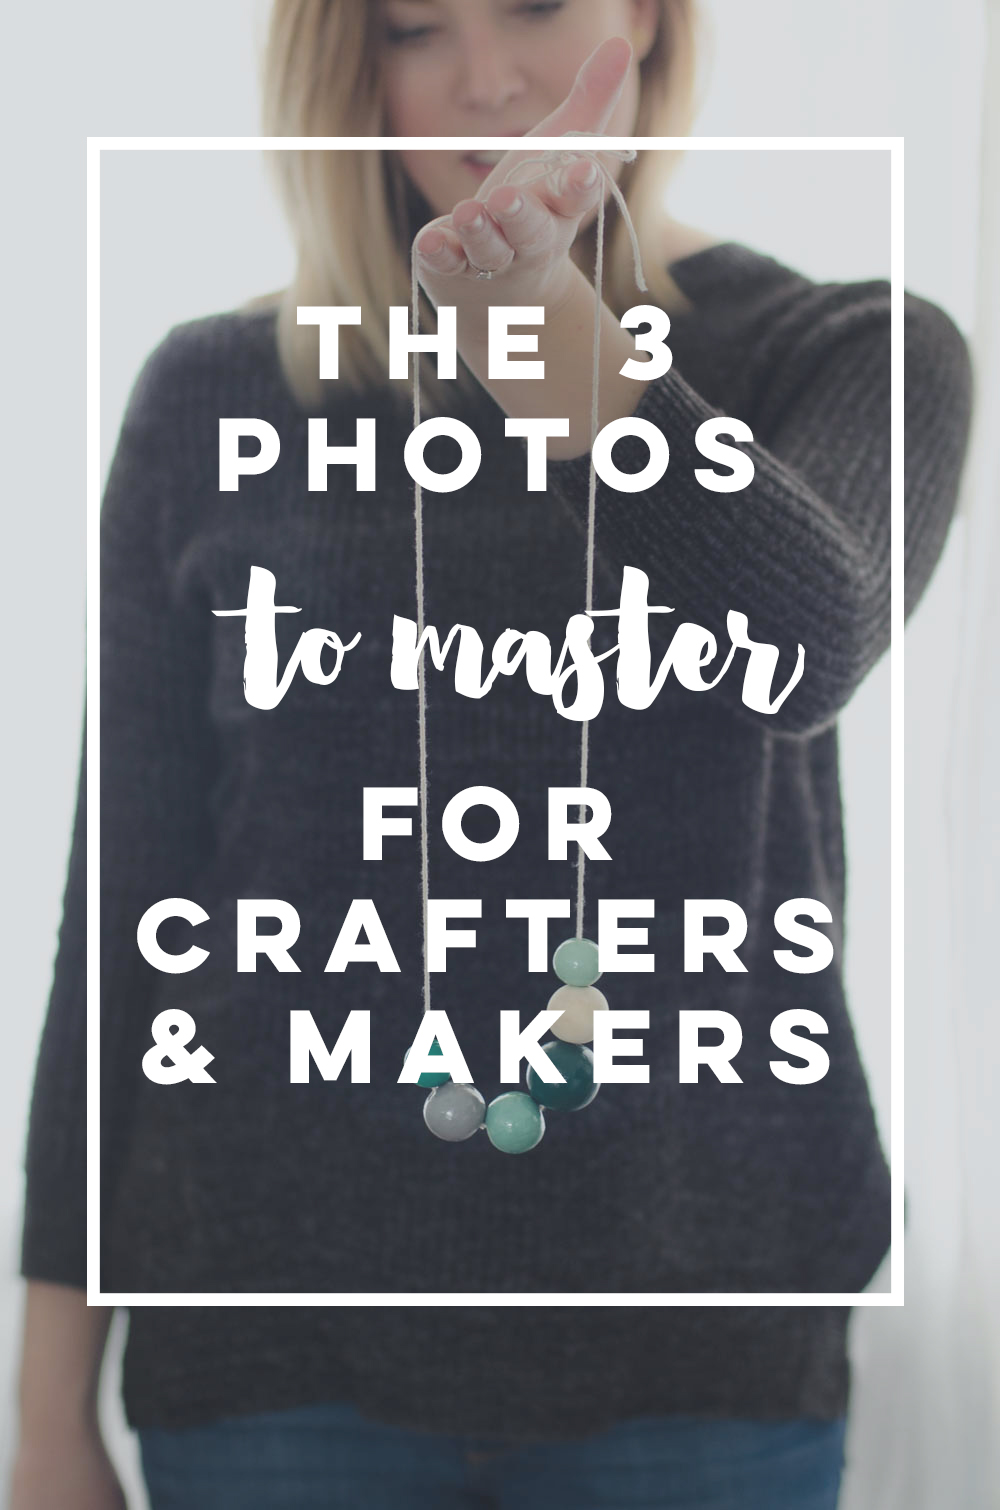 So helpful to break it down to the basic three photos! Every craft and maker needs to read this- basic photography tips.